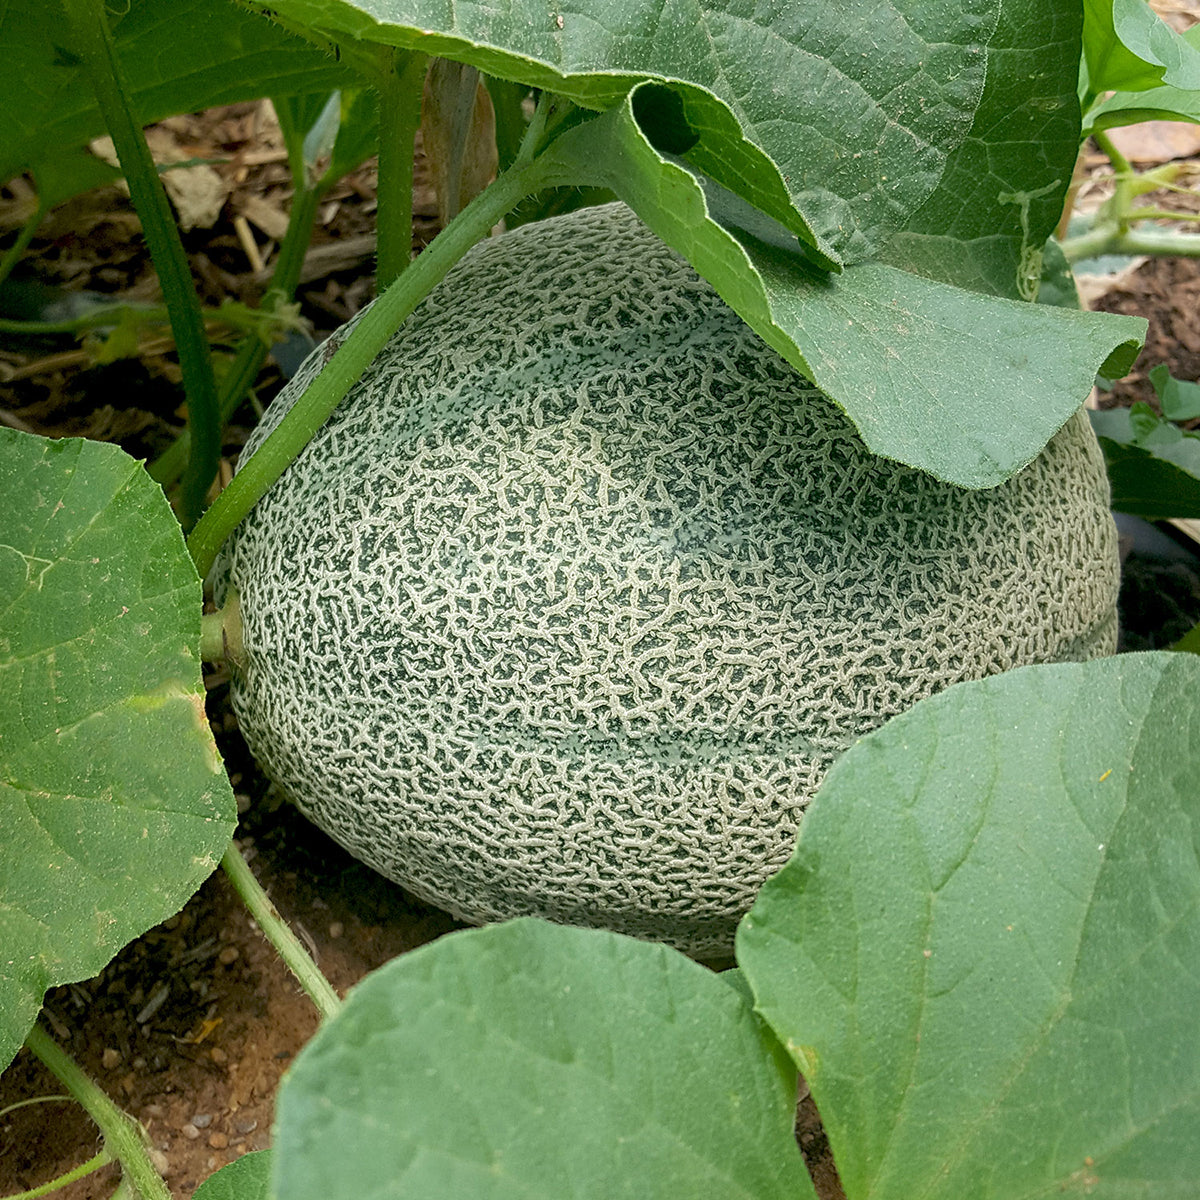 Melon Mexicano seeds. great for growing in hot dry climates. from native seeds search